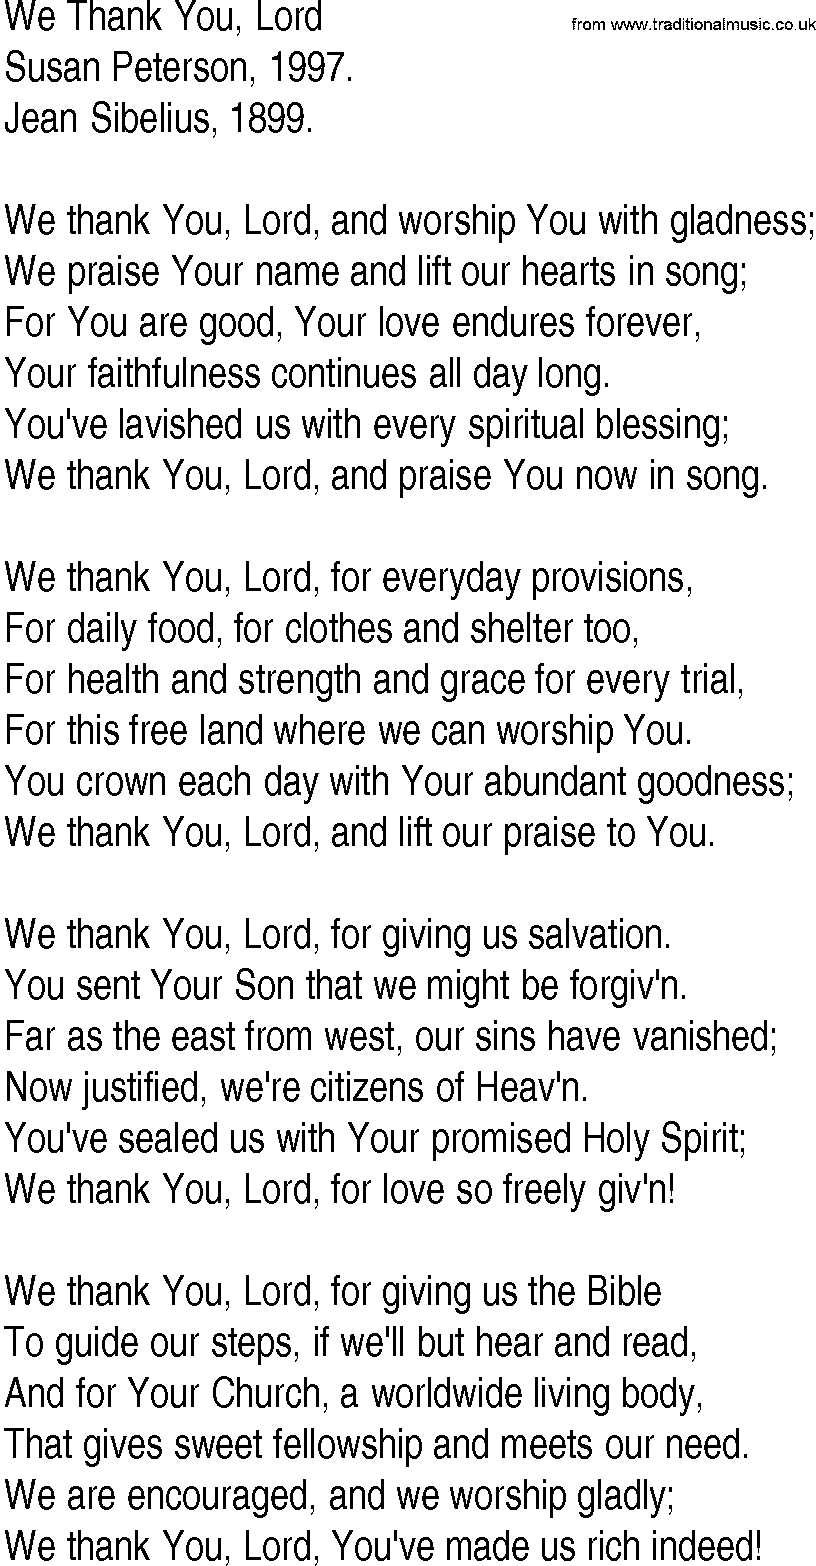 Hymn and Gospel Song: We Thank You, Lord by Susan Peterson lyrics